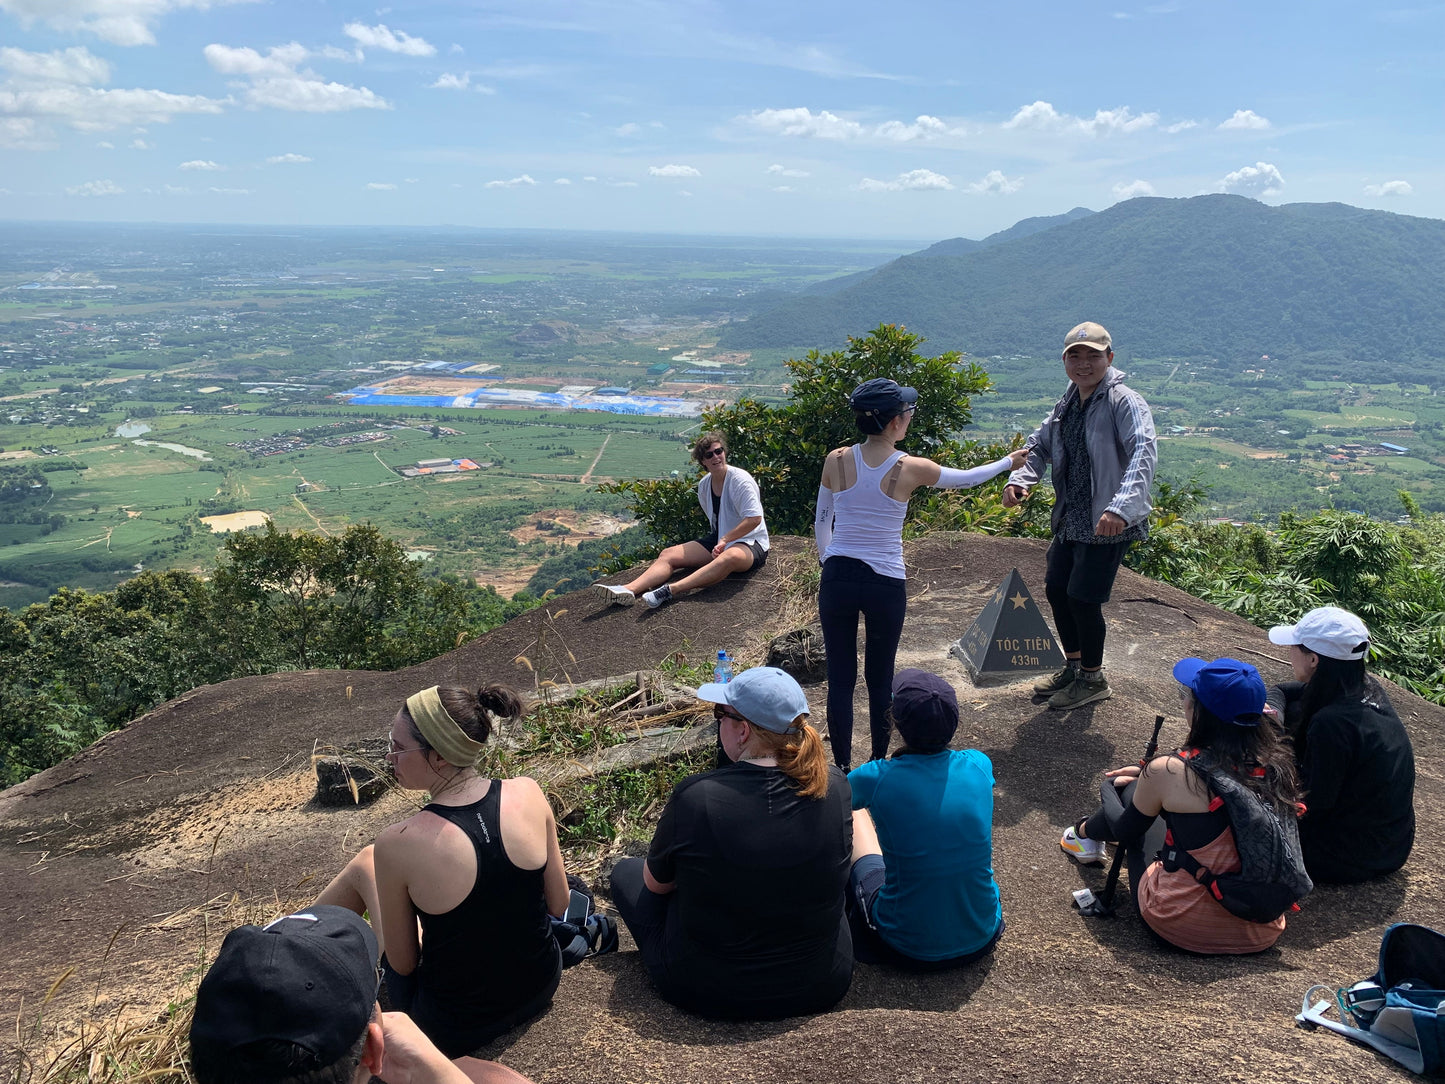 86A2: Hiking Two Peaks Amidst Bamboo Trails with Stunning Summit Views